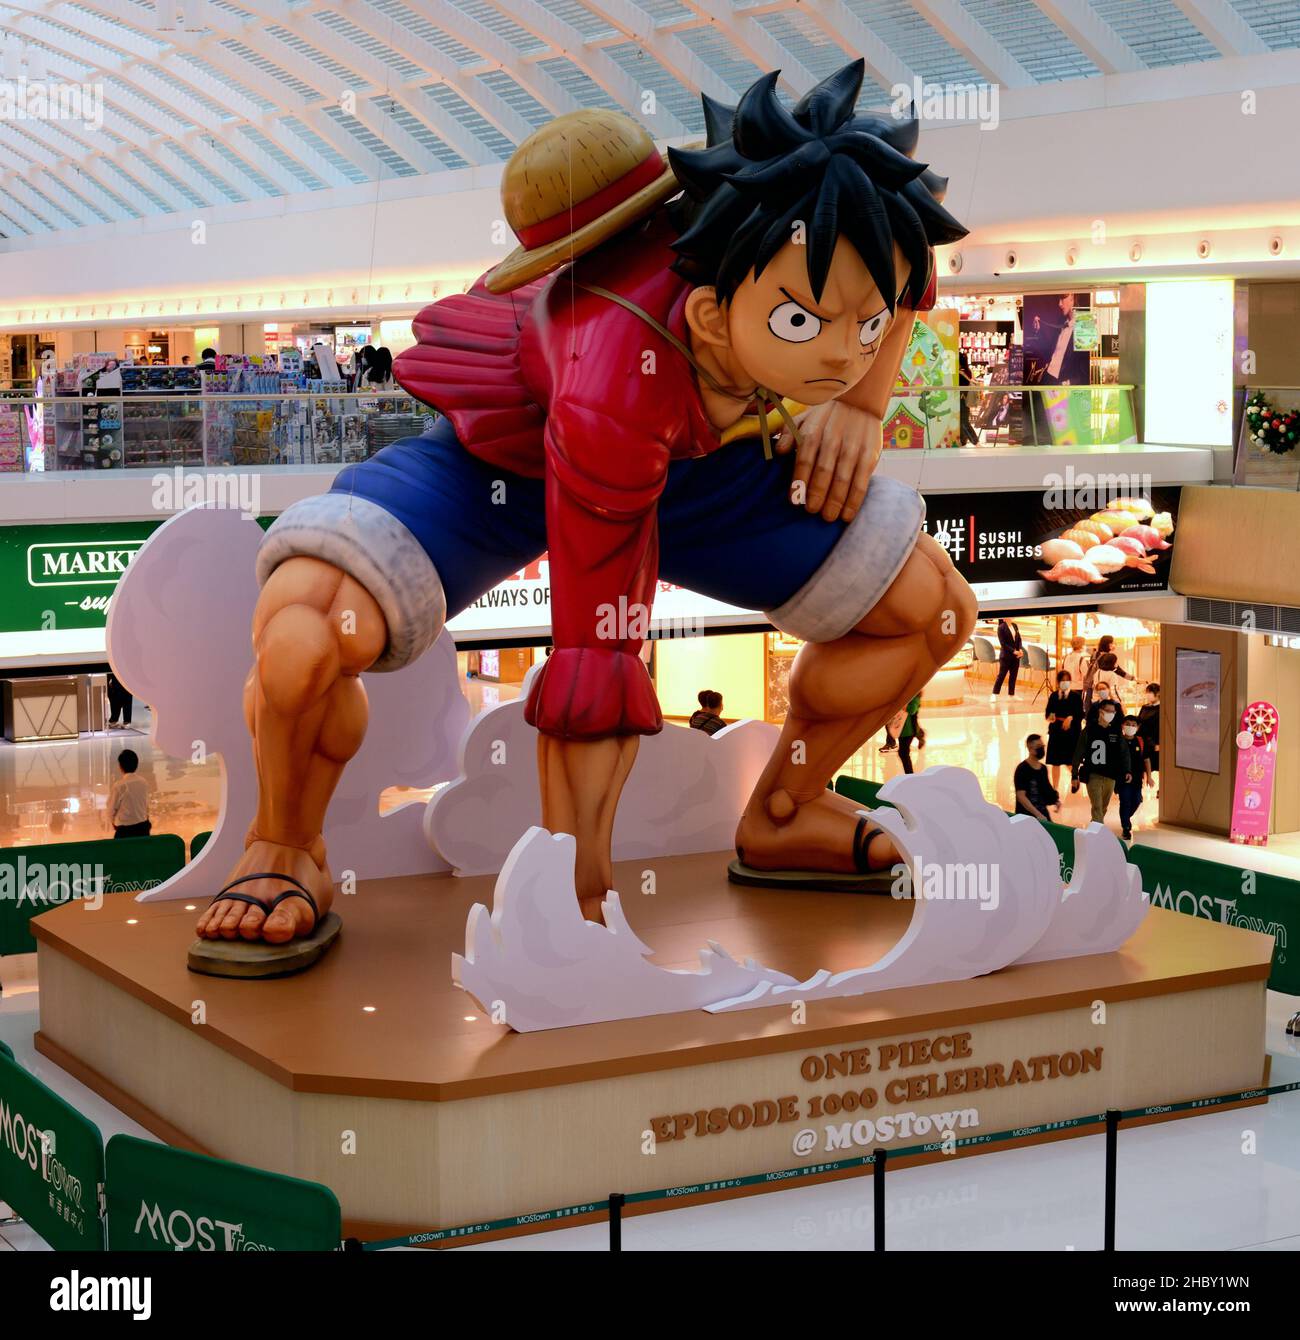 One Piece Stampede Anime Film Opens in Thailand in September - News - Anime  News Network